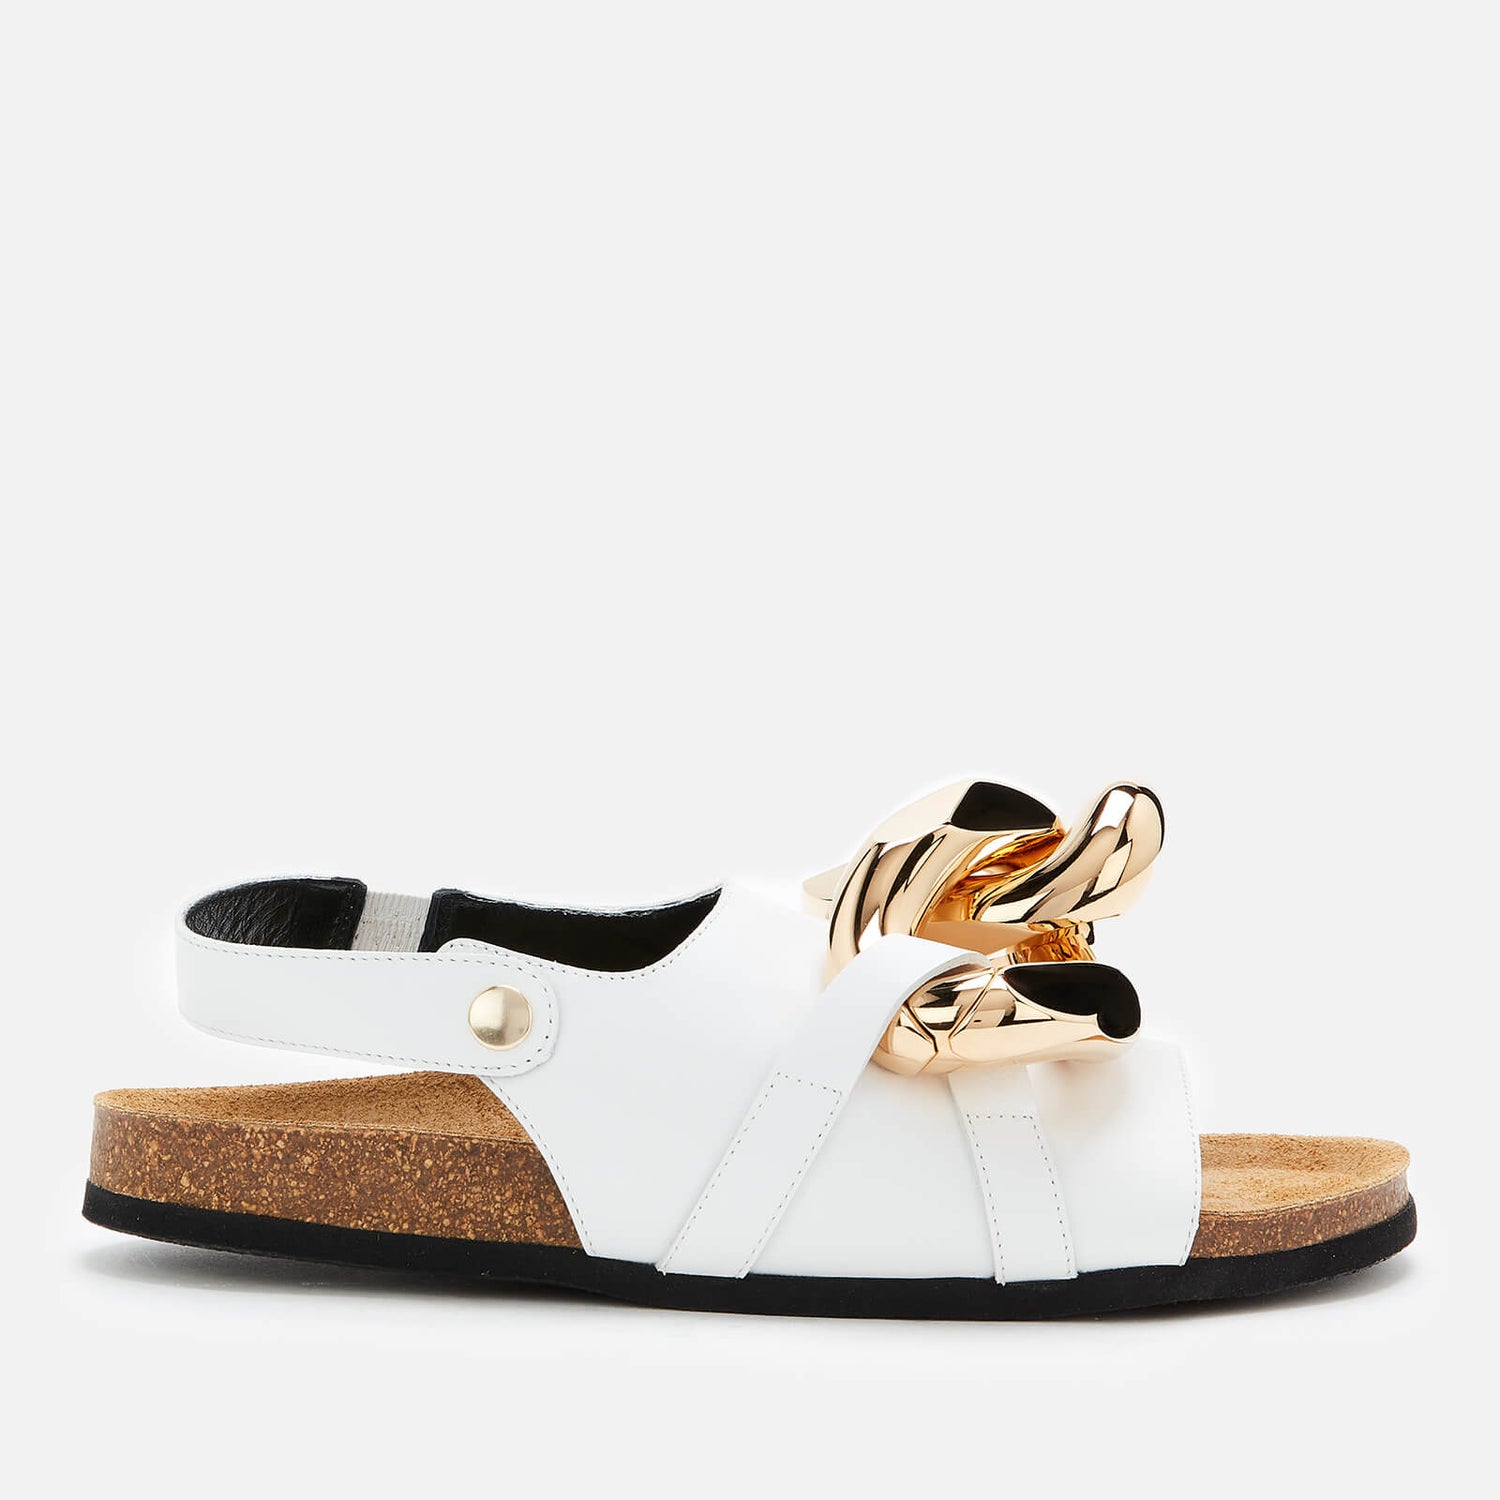 JW Anderson Women's Chain Leather Flat Sandals - White - UK 3